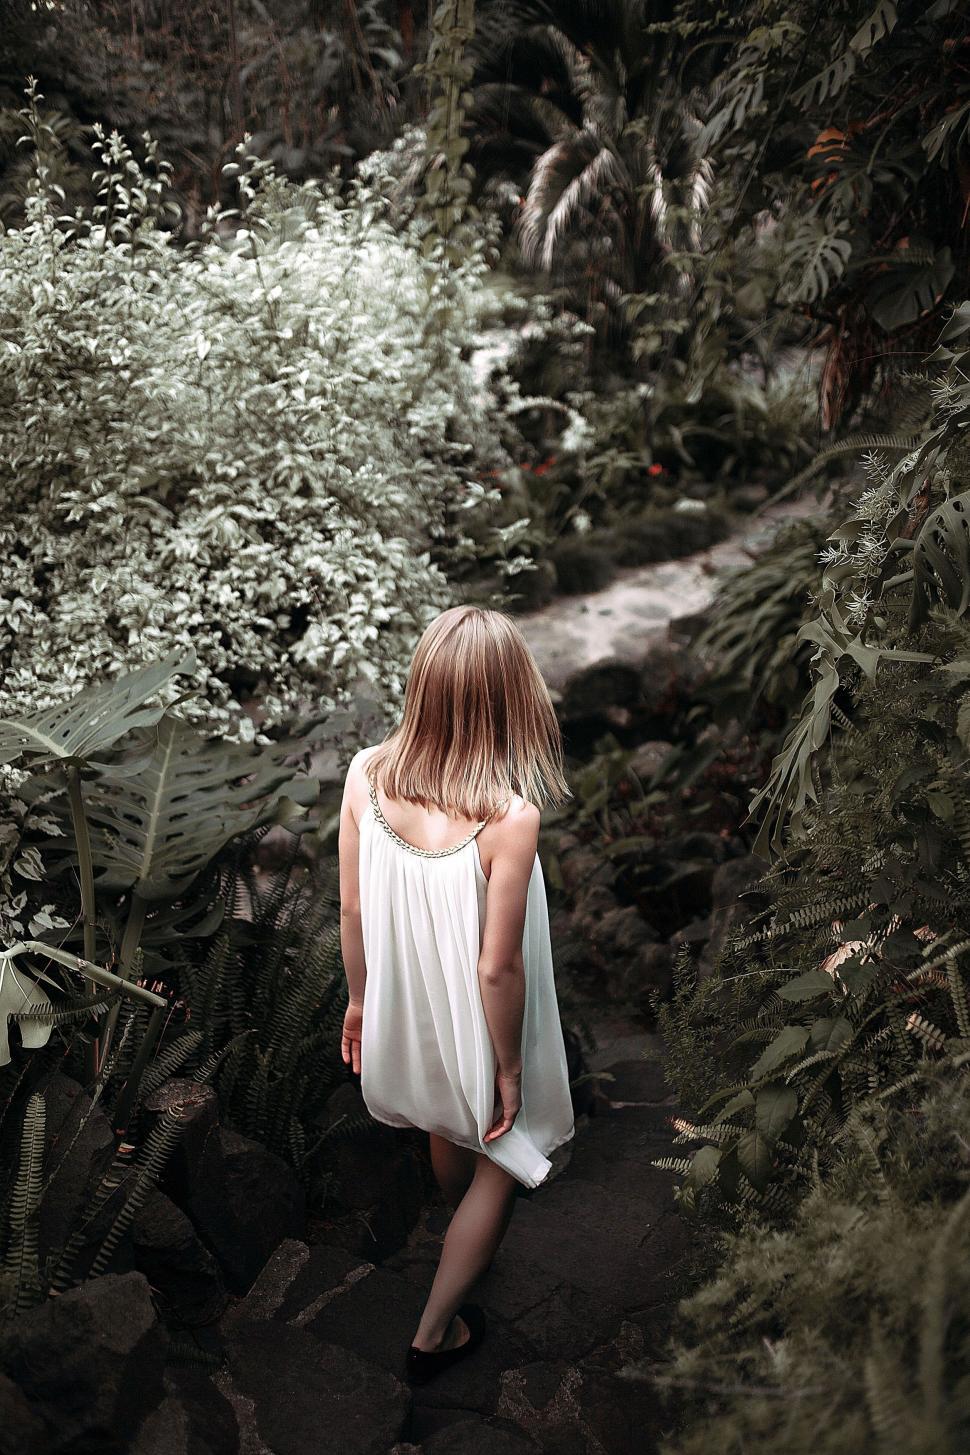 Free Image of Woman in White Dress Walking Through Forest 